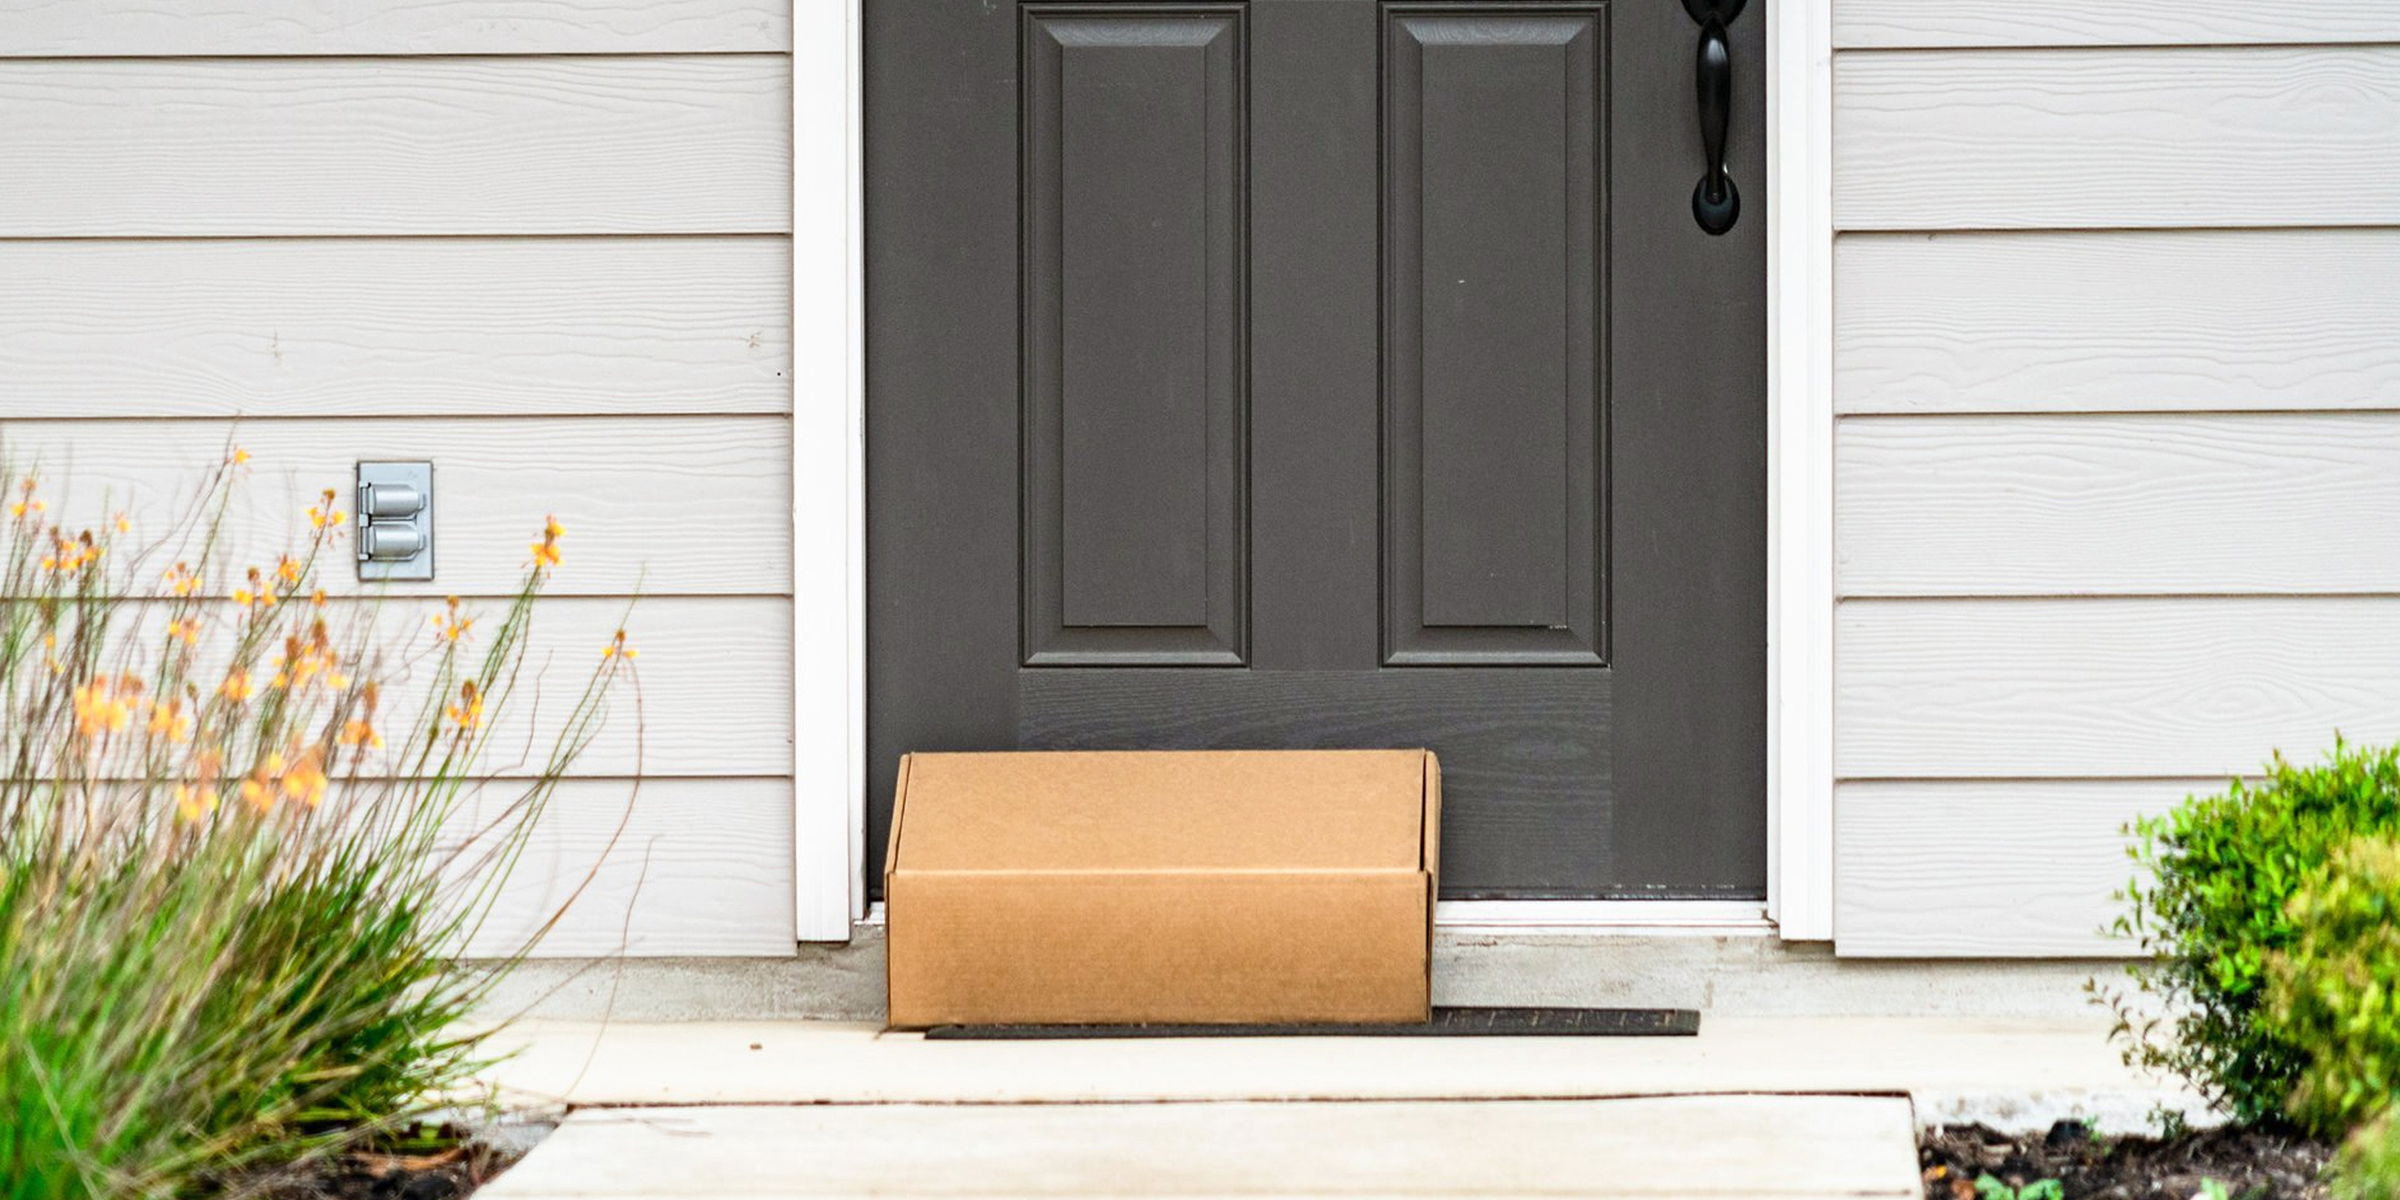 A cardboard box on a front door porch | Source: Shutterstock